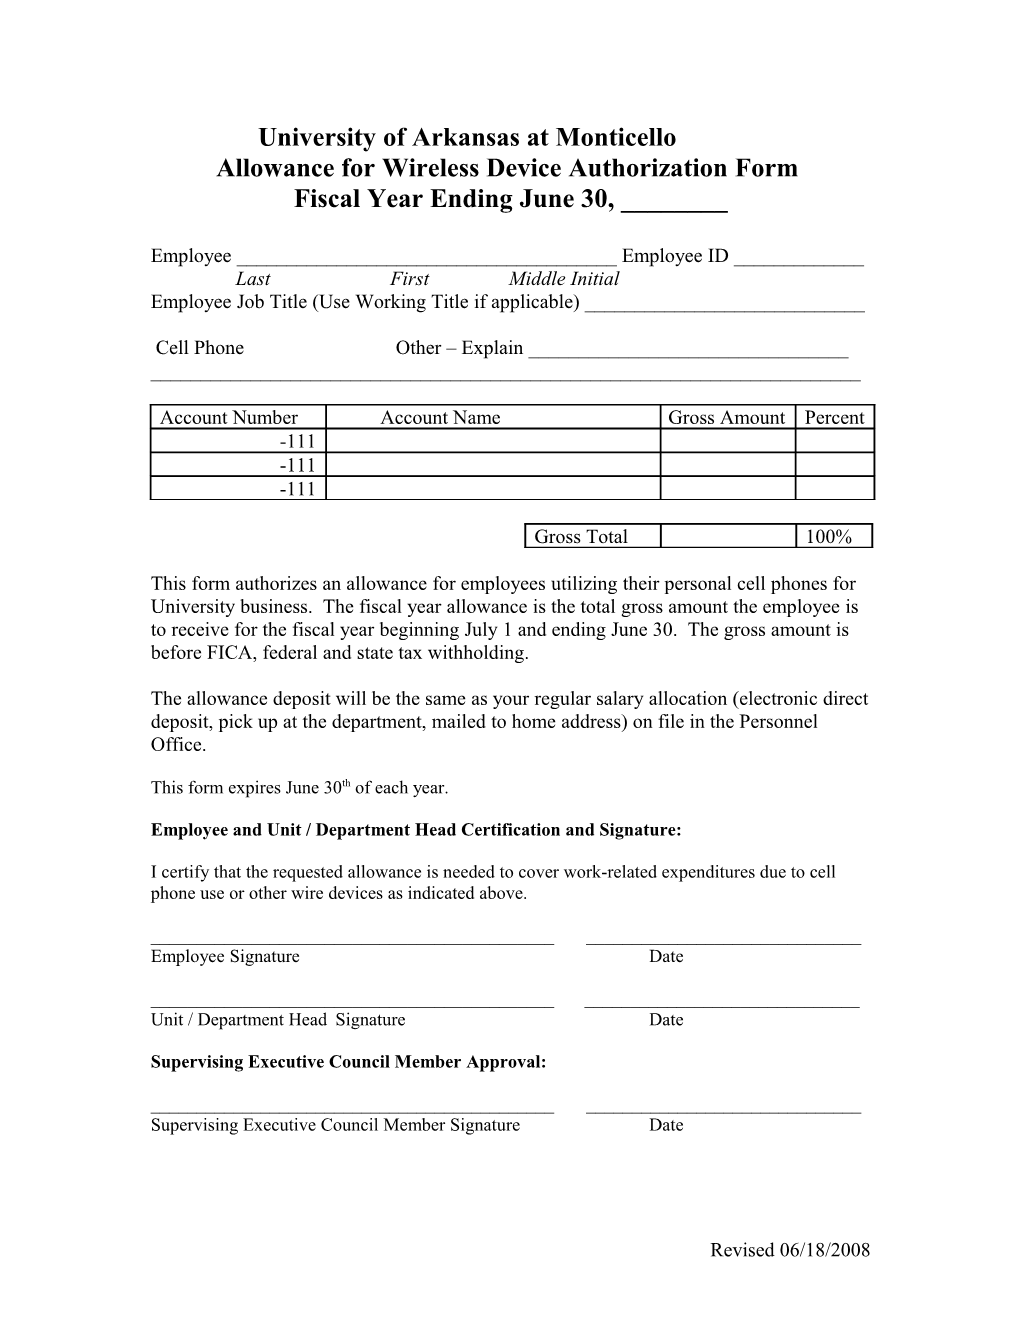 Allowance for Wireless Devise Authorization Form